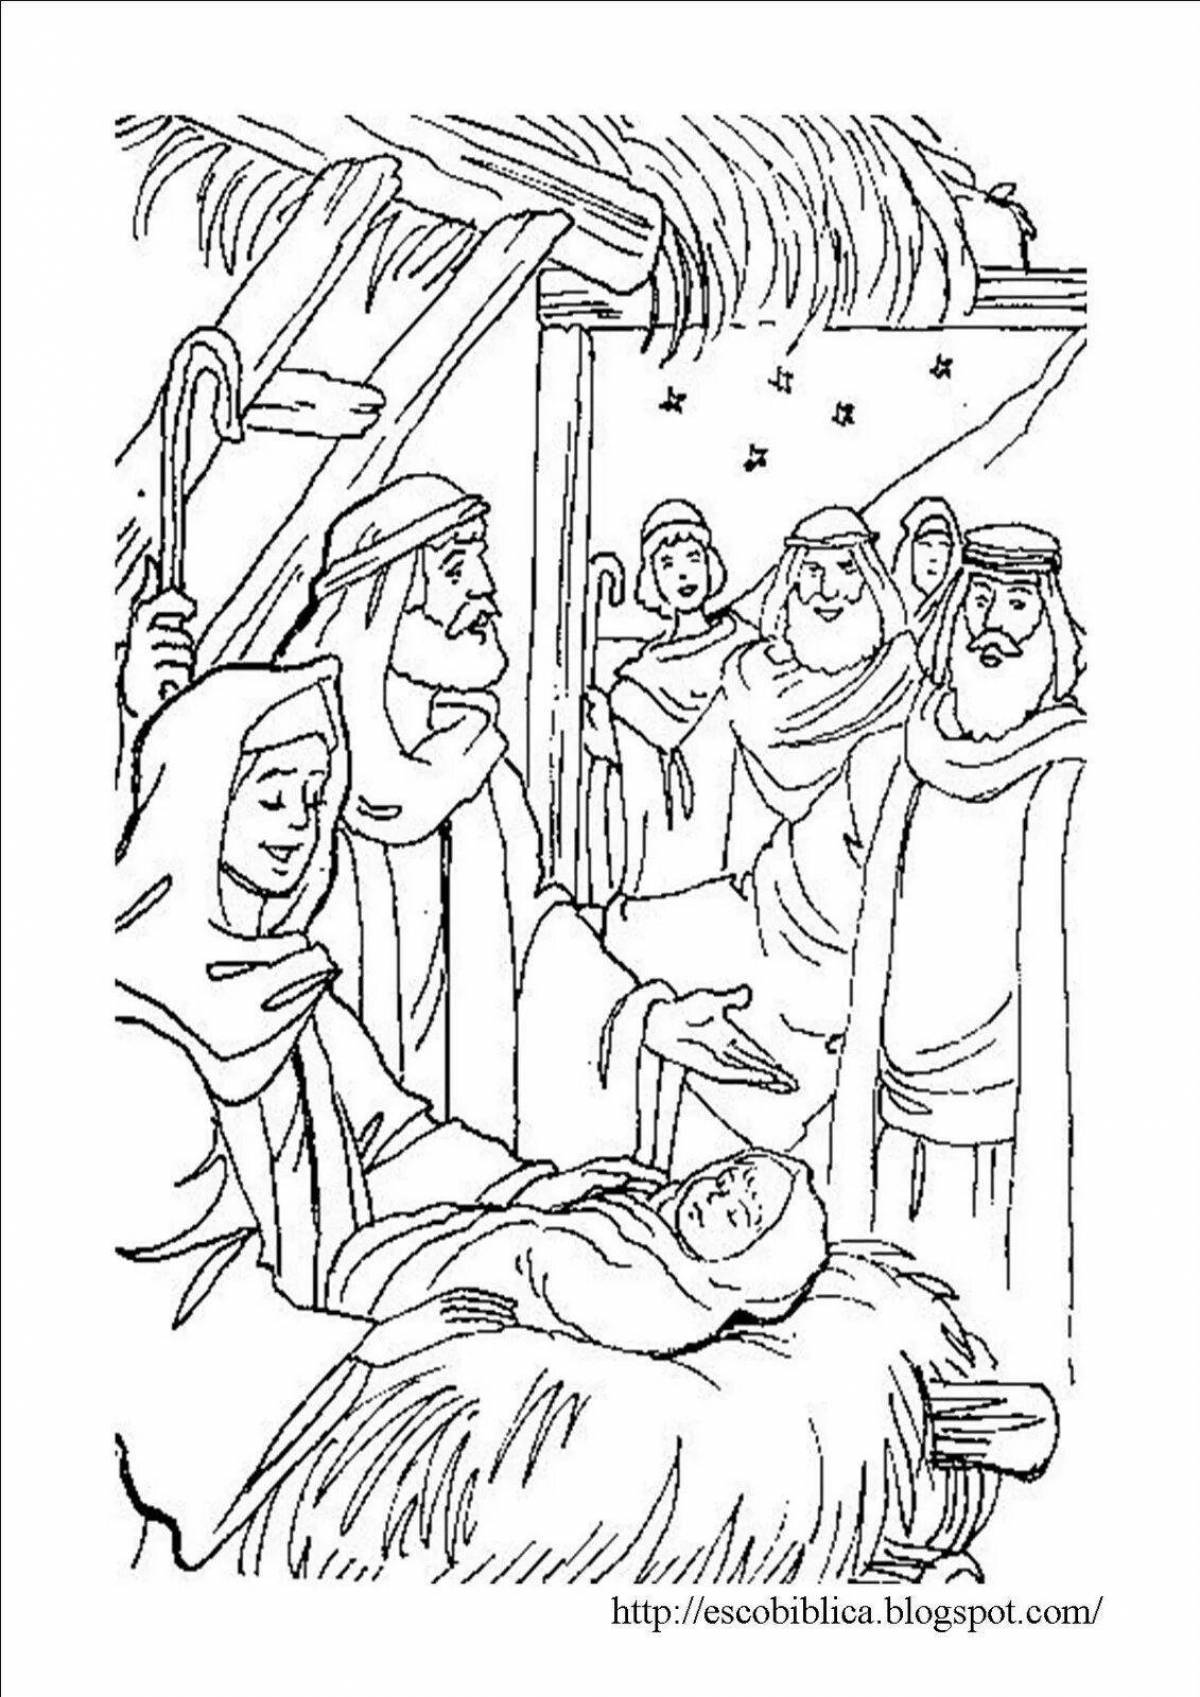 Awesome Christmas story coloring book